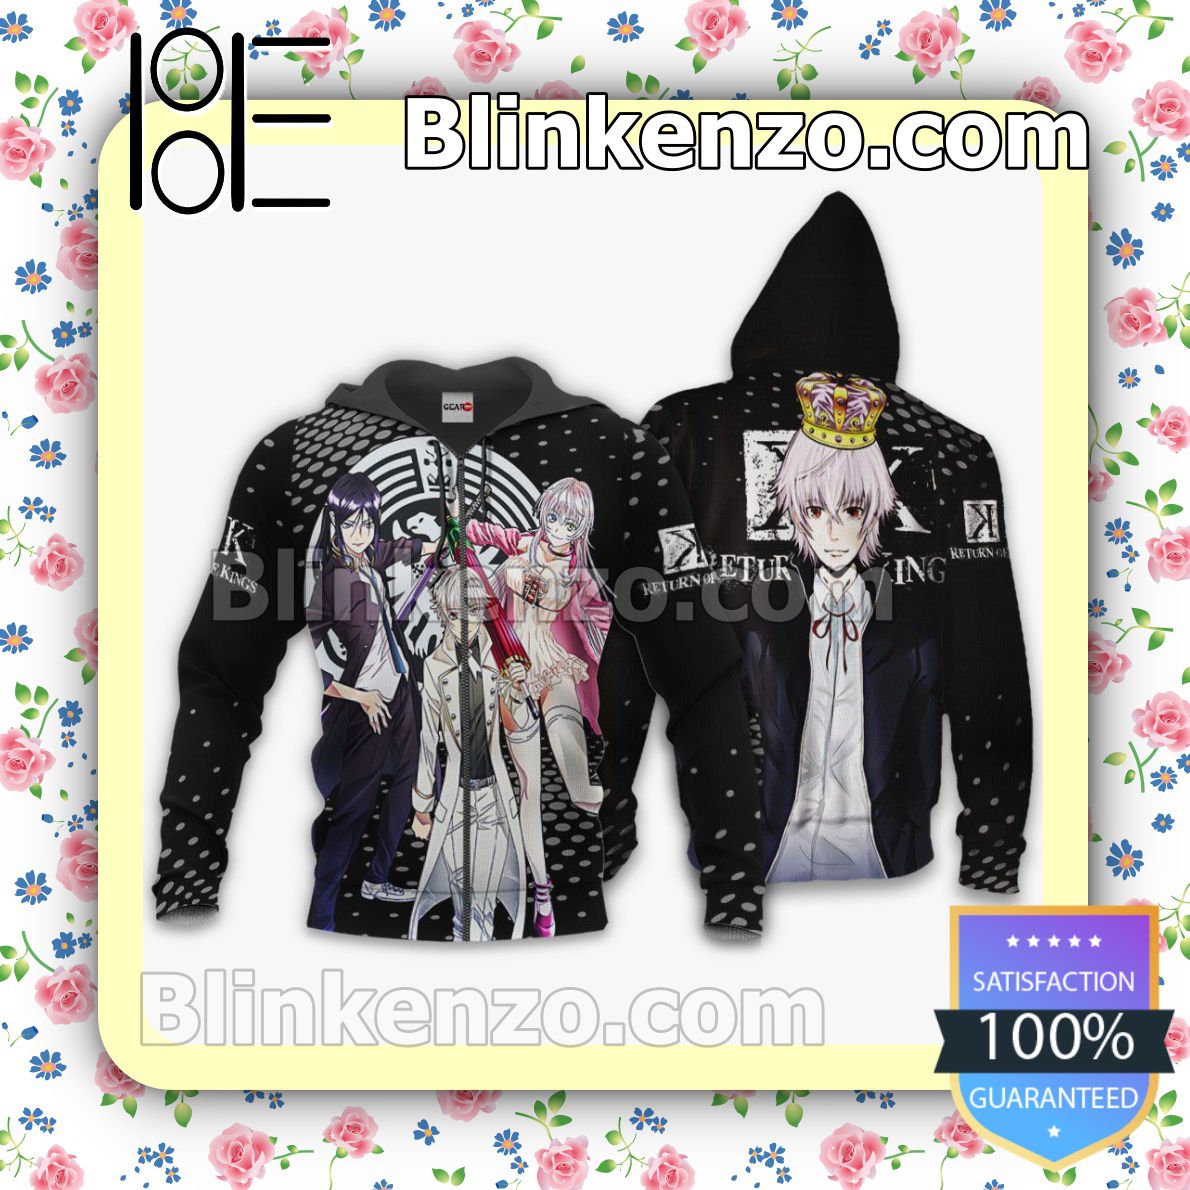 K-Project Return of Kings Anime Personalized T-shirt, Hoodie, Long Sleeve, Bomber Jacket